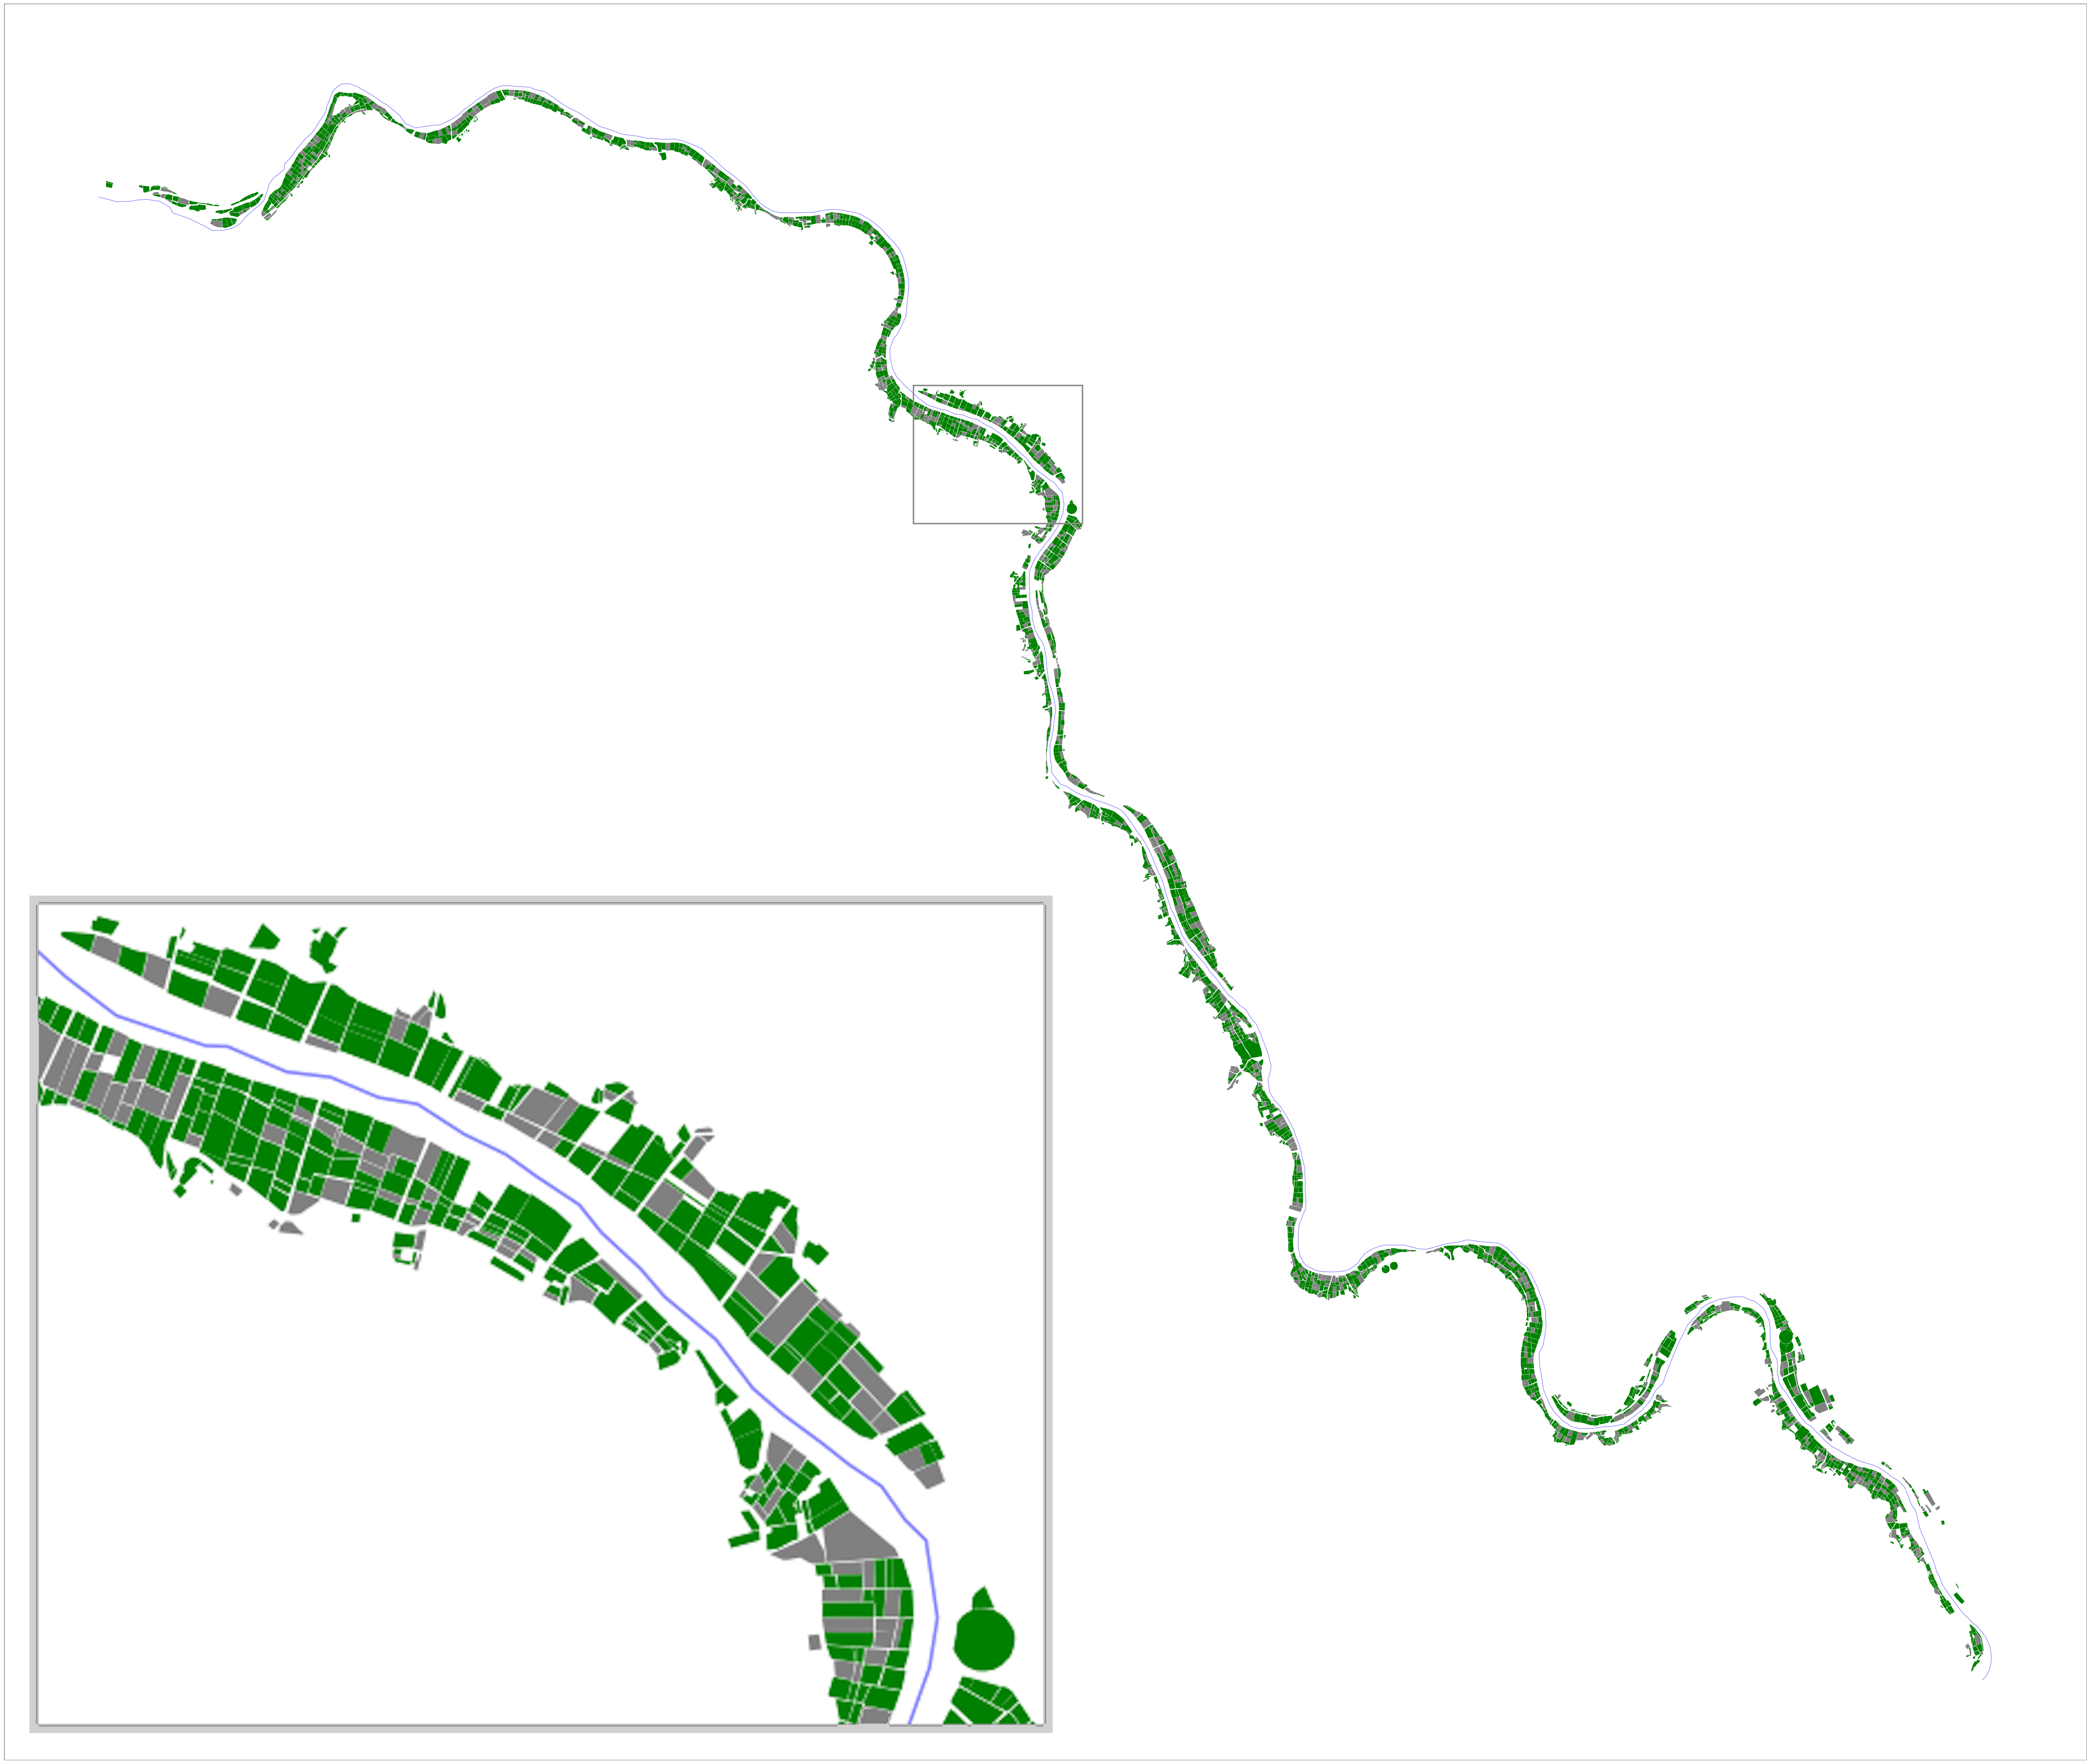 The section of the Orange River — grey test set fields interspersed amongst green training set fields